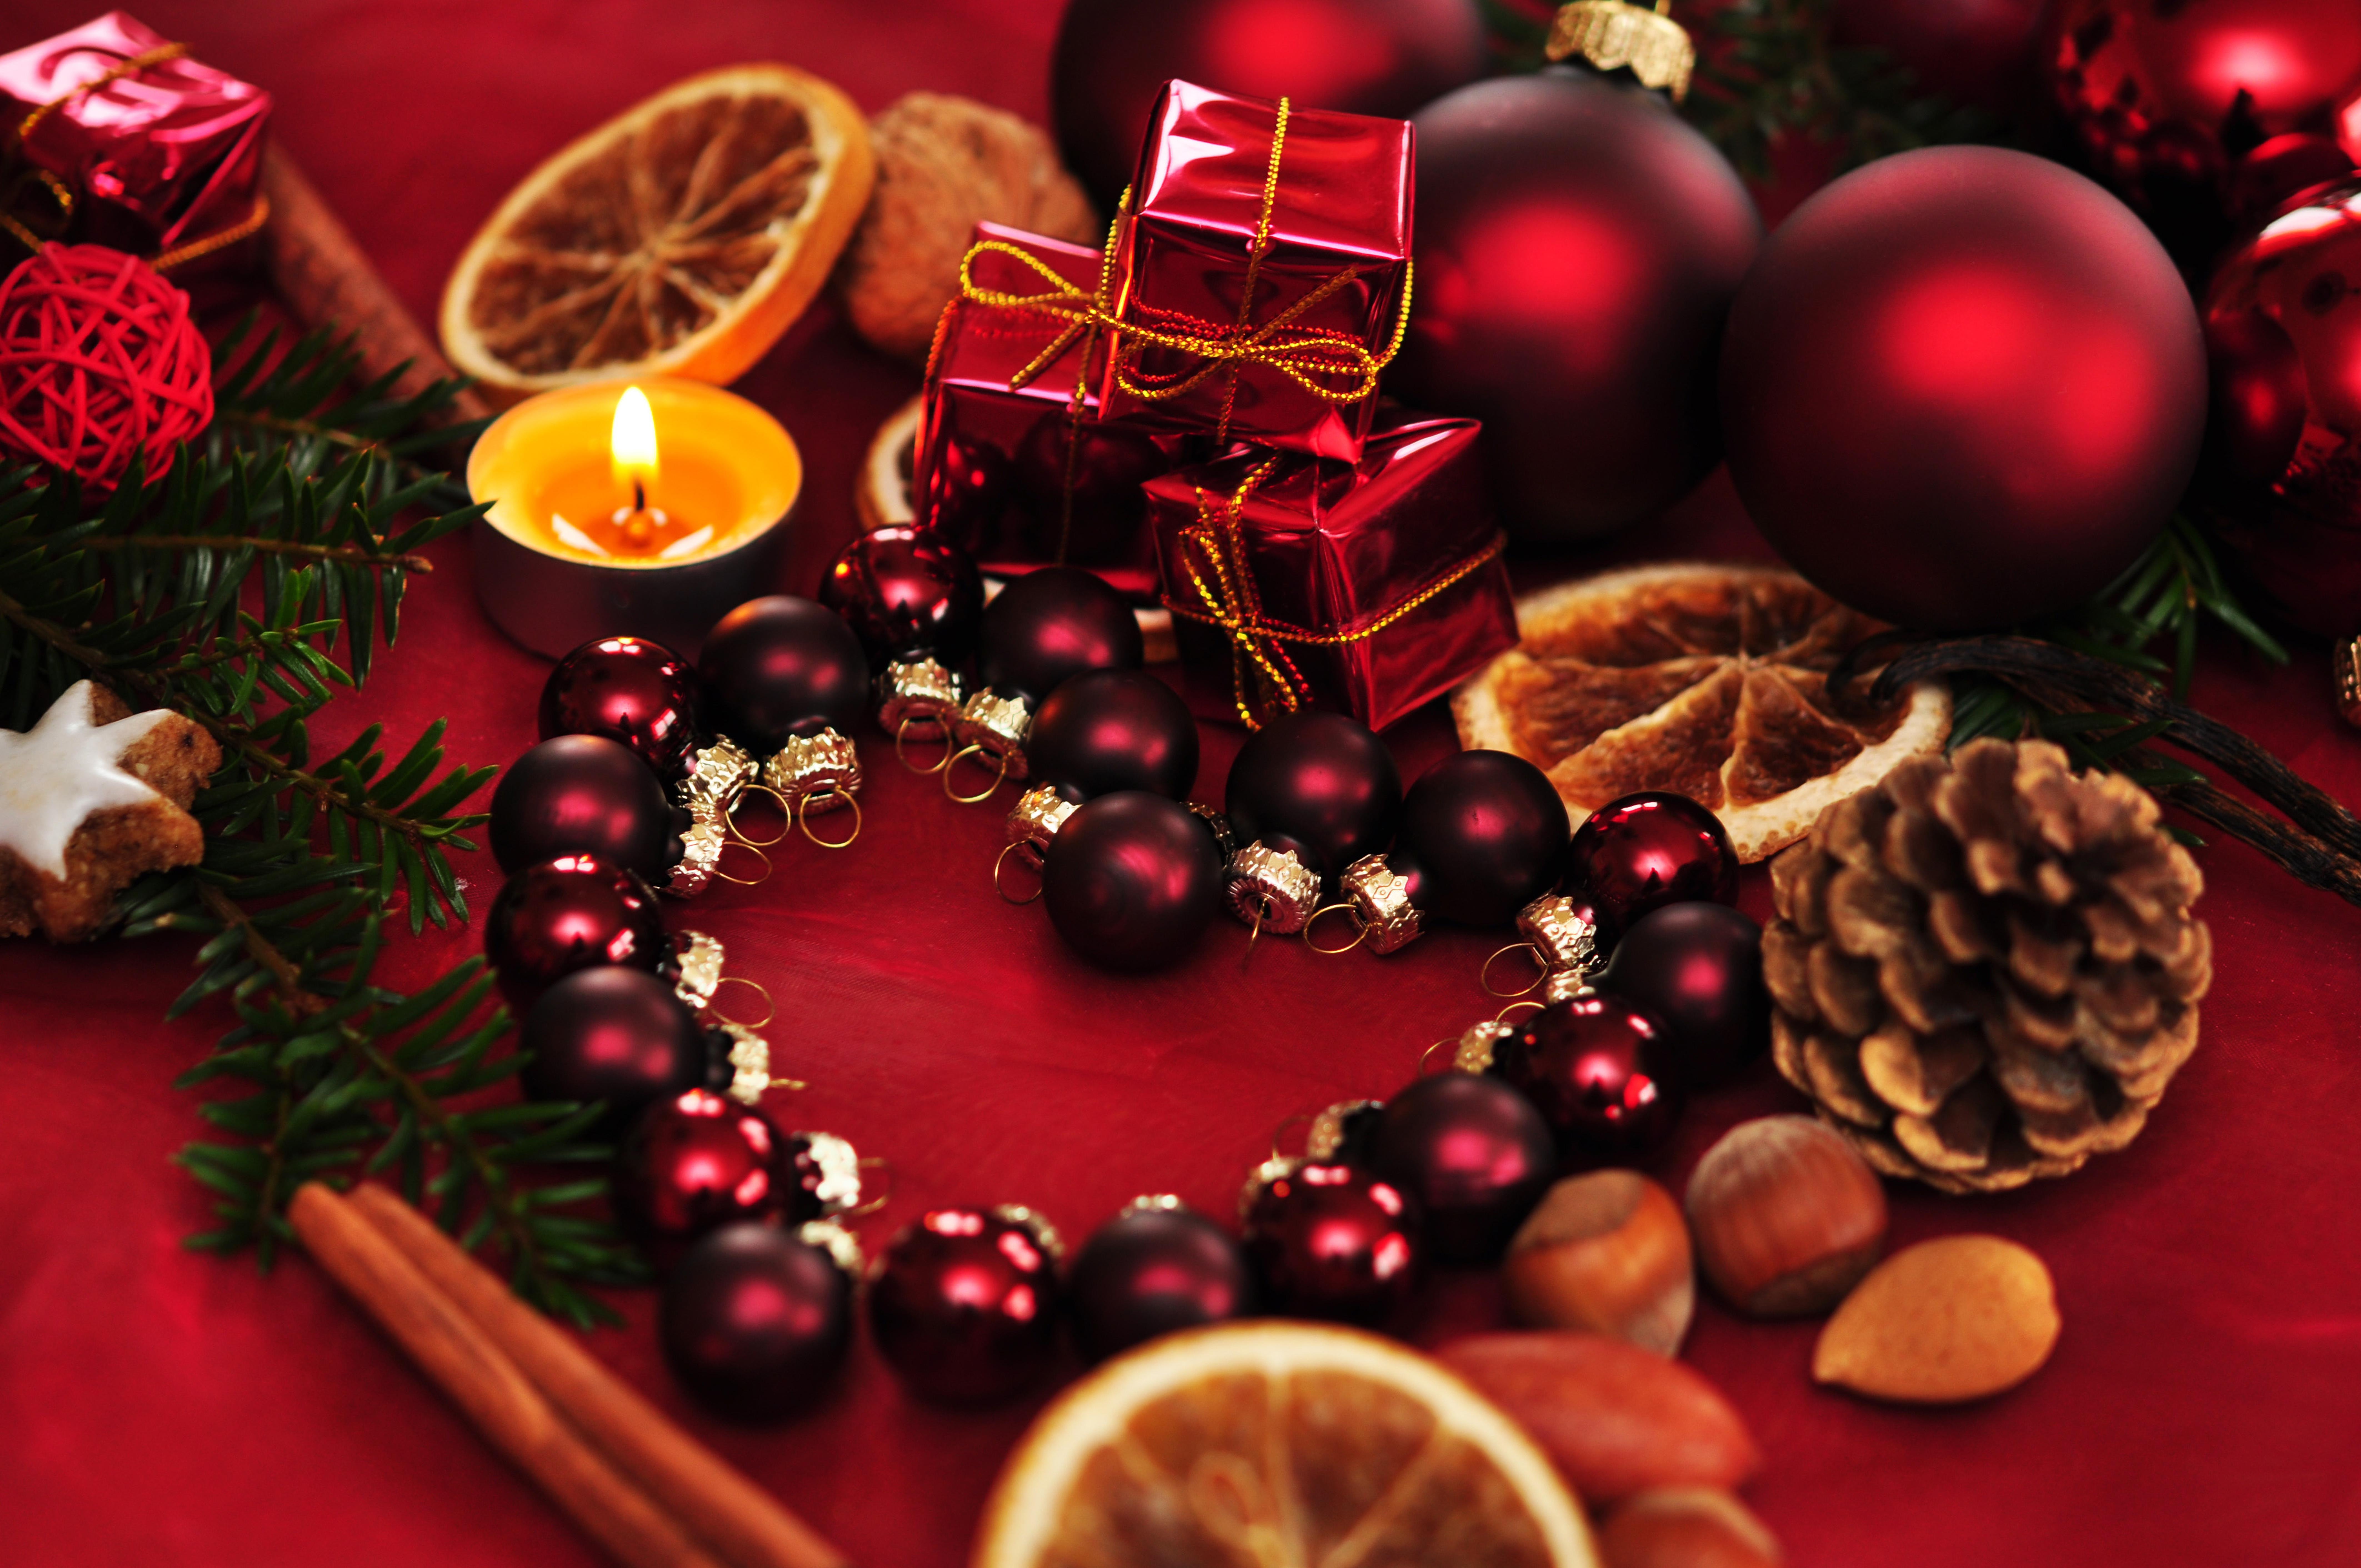 Image: Decor, Christmas balloons, heart, candles, nuts, cinnamon, bump, new year, red background